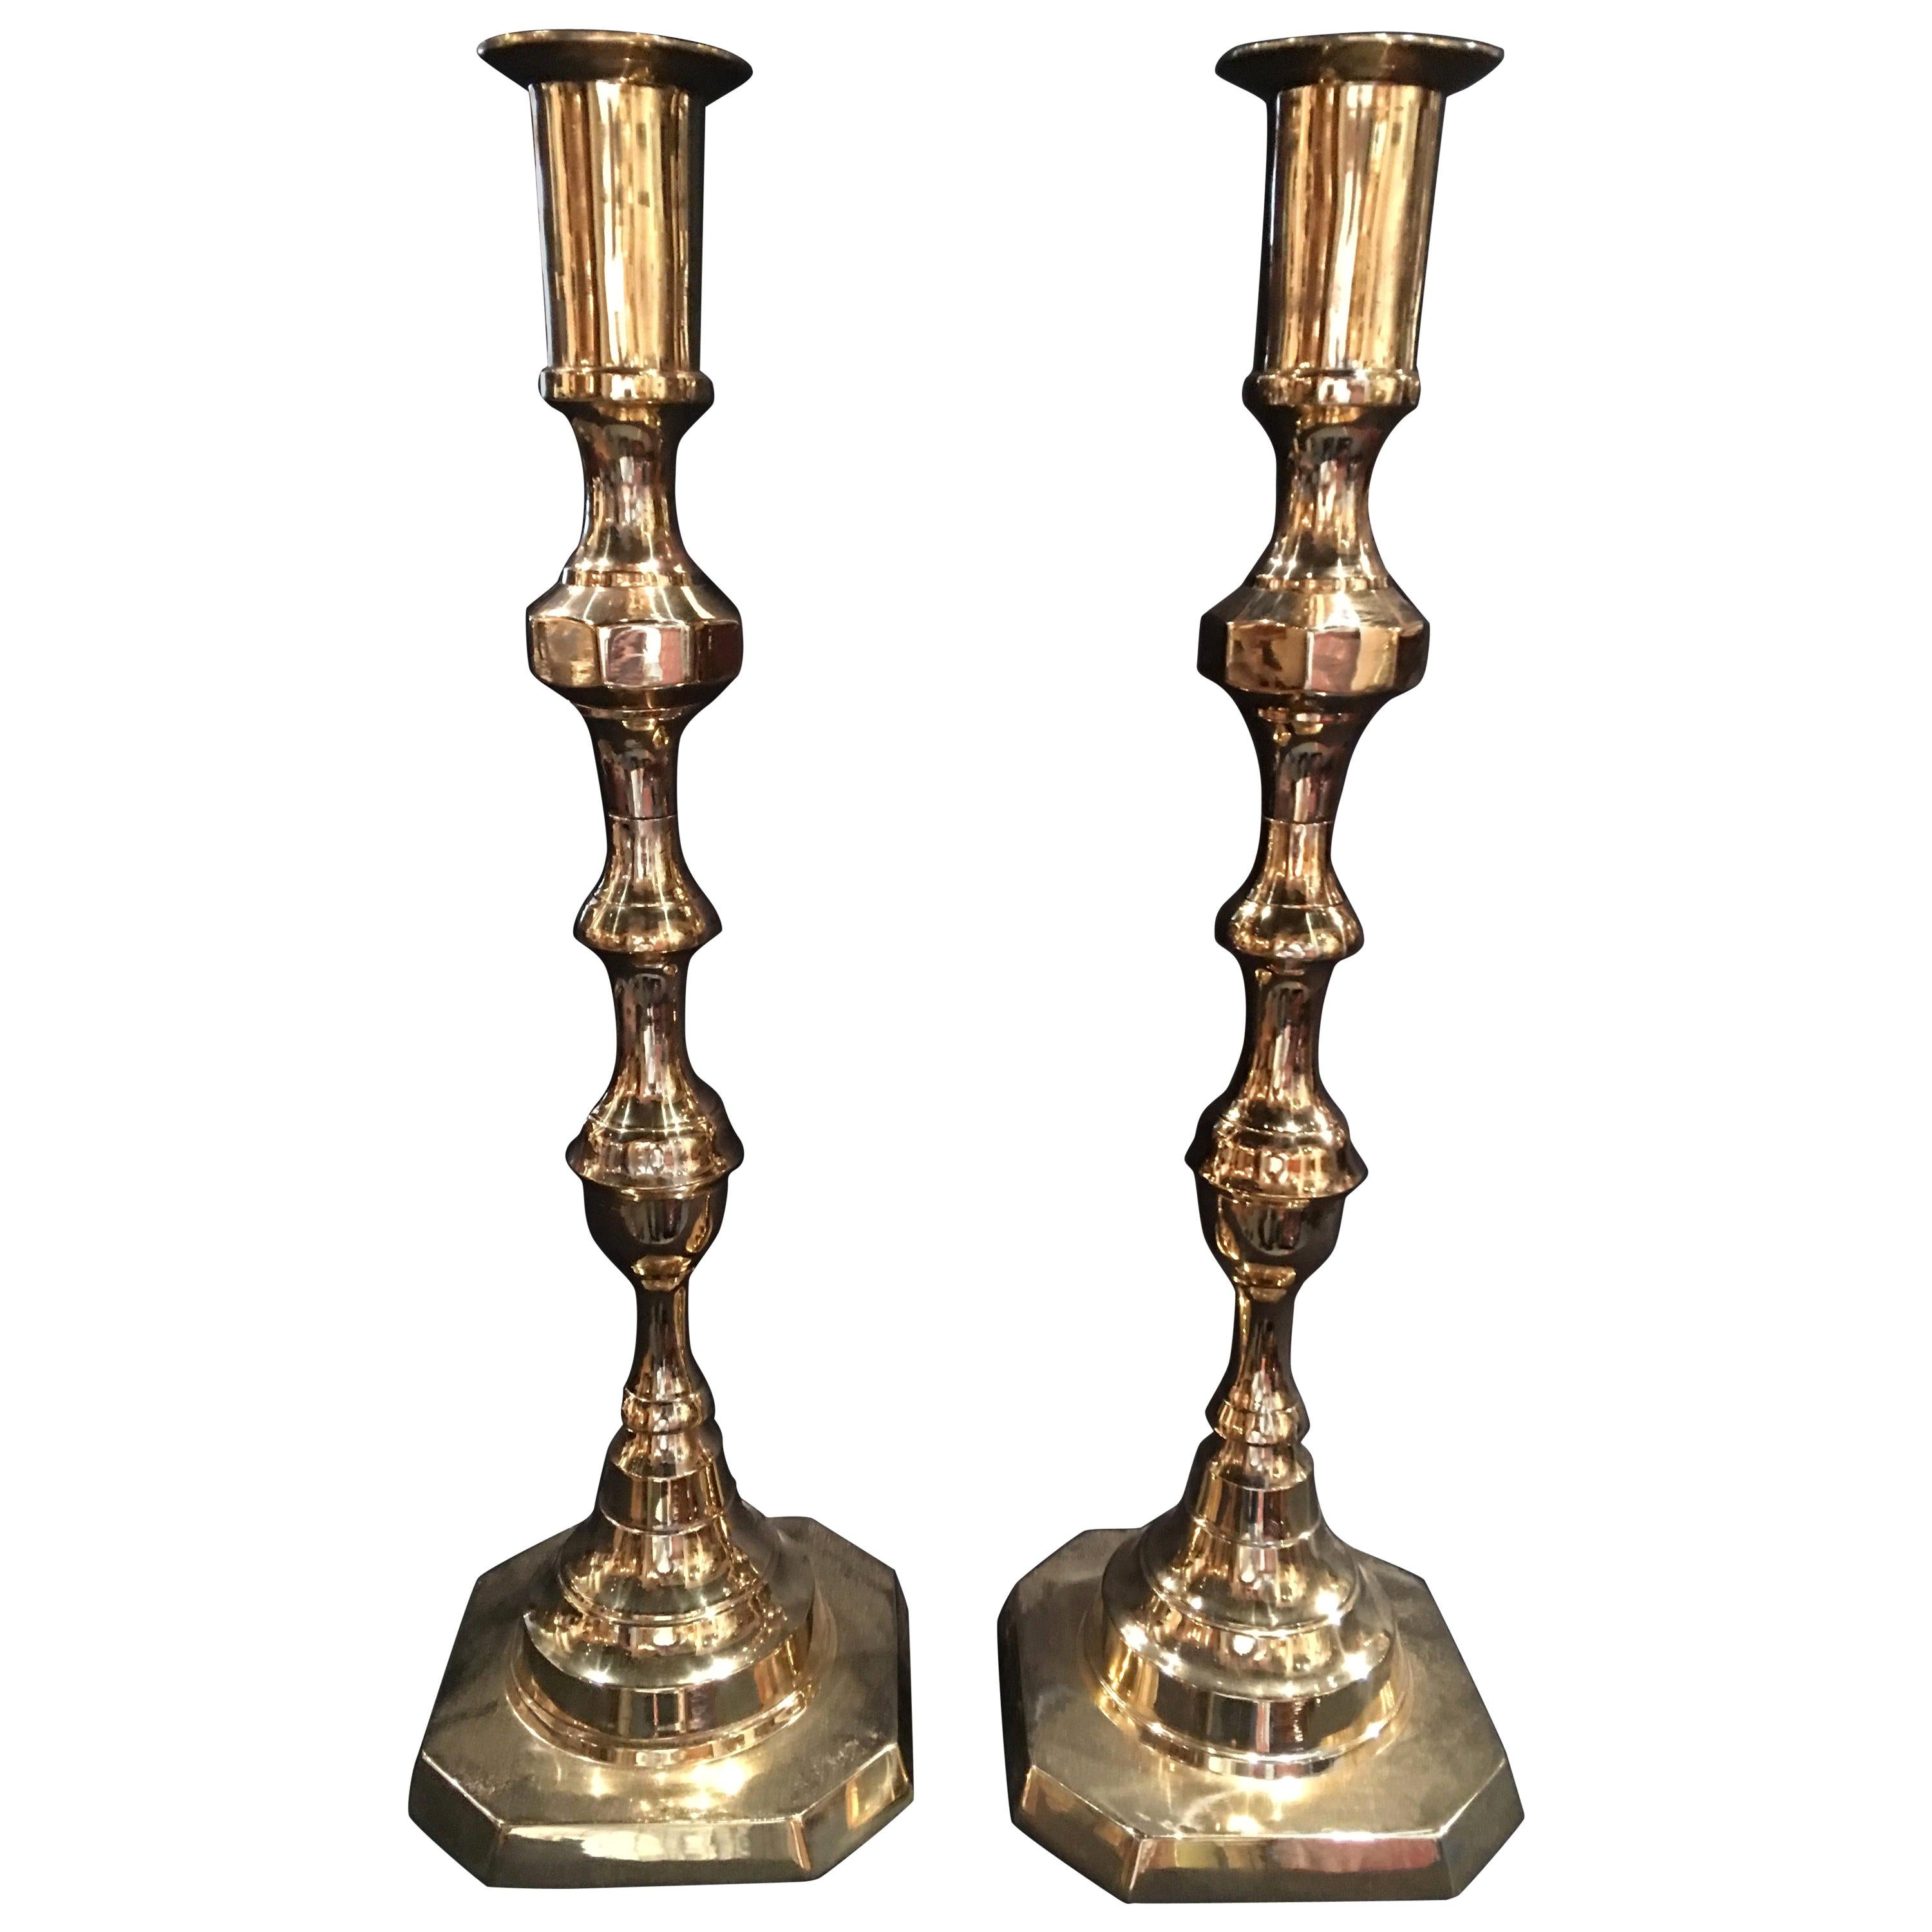 Pair of Tall English Polished Brass Candlesticks, 19th Century For Sale